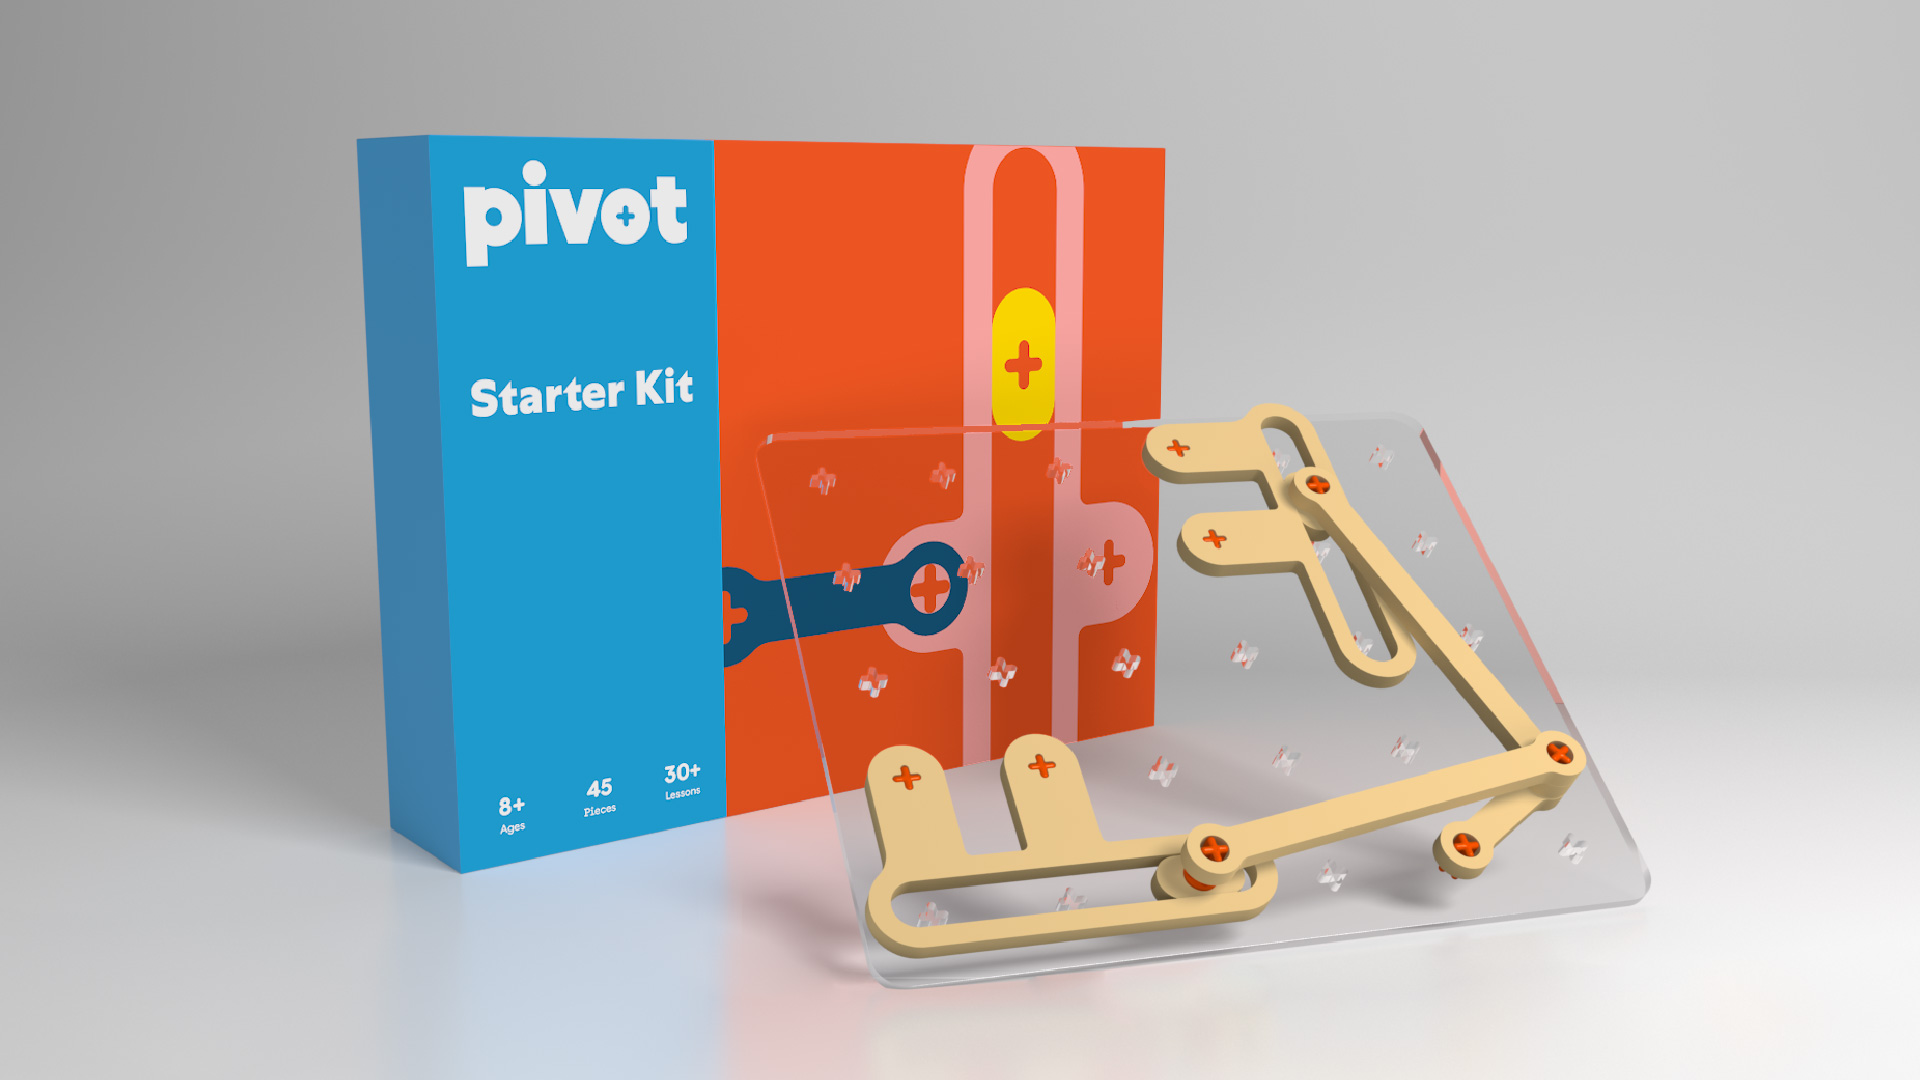 Pivot product shot and packaging